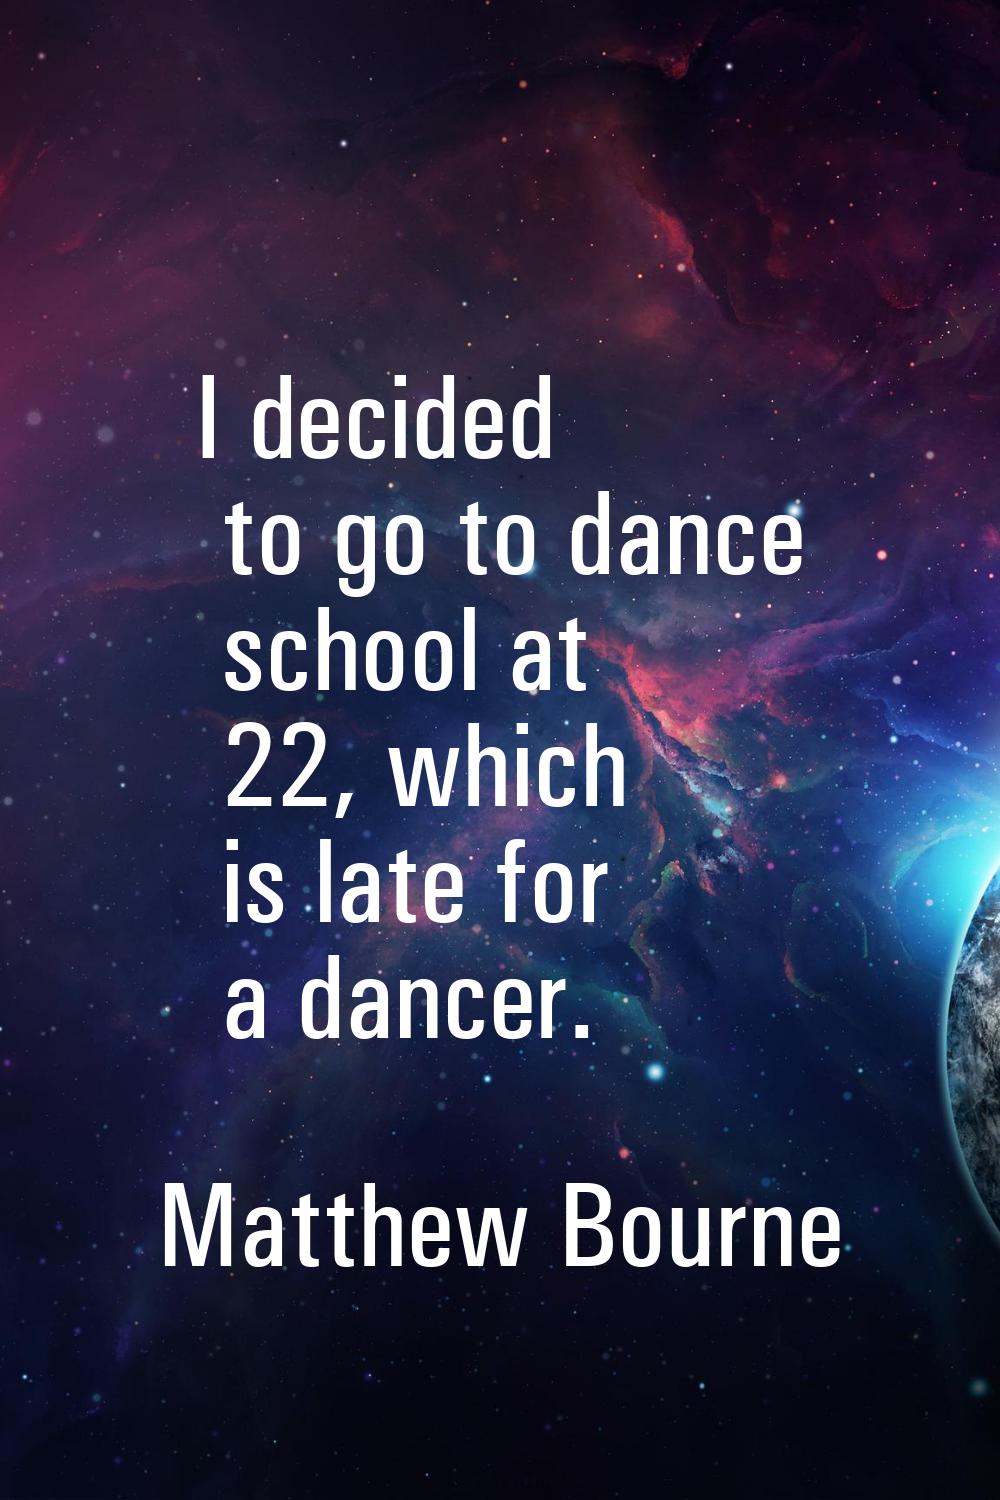 I decided to go to dance school at 22, which is late for a dancer.